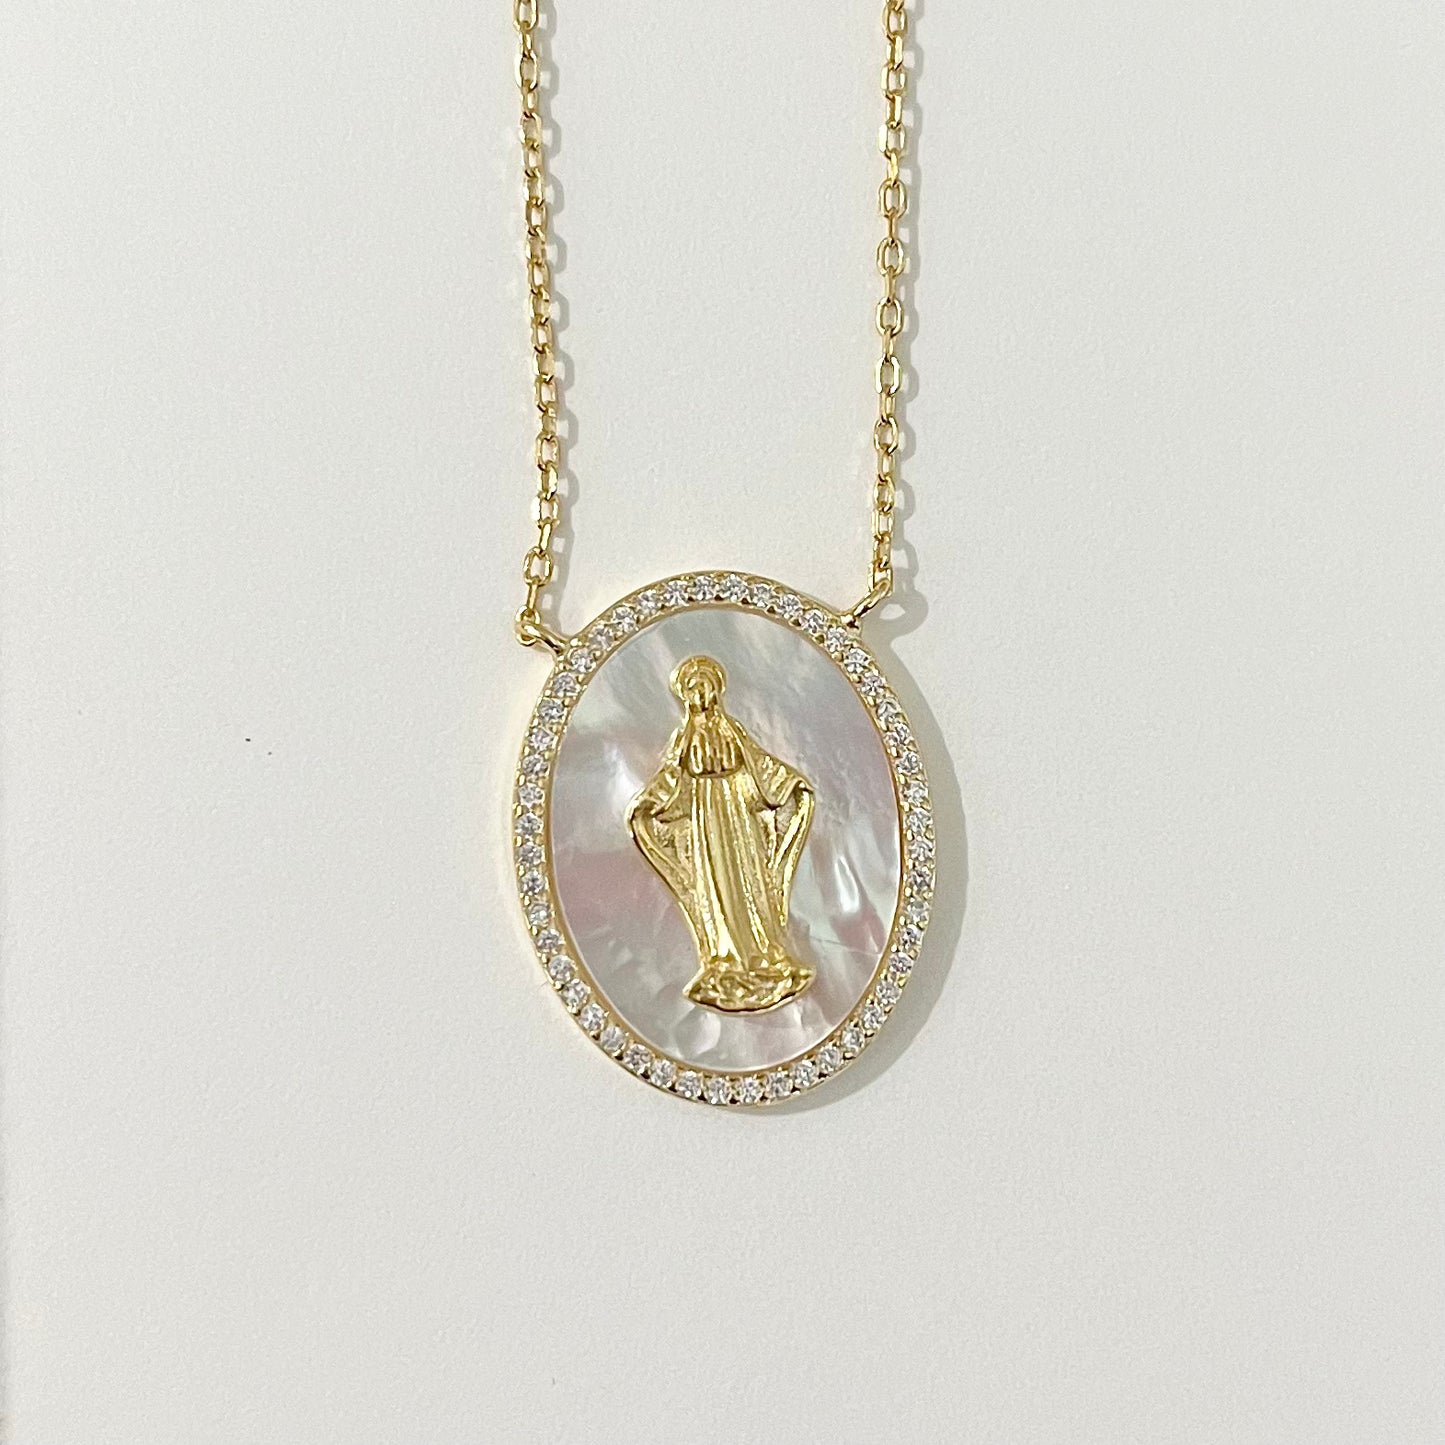 Mother of Pearl Miraculous Medal Necklace with Zirconium Border